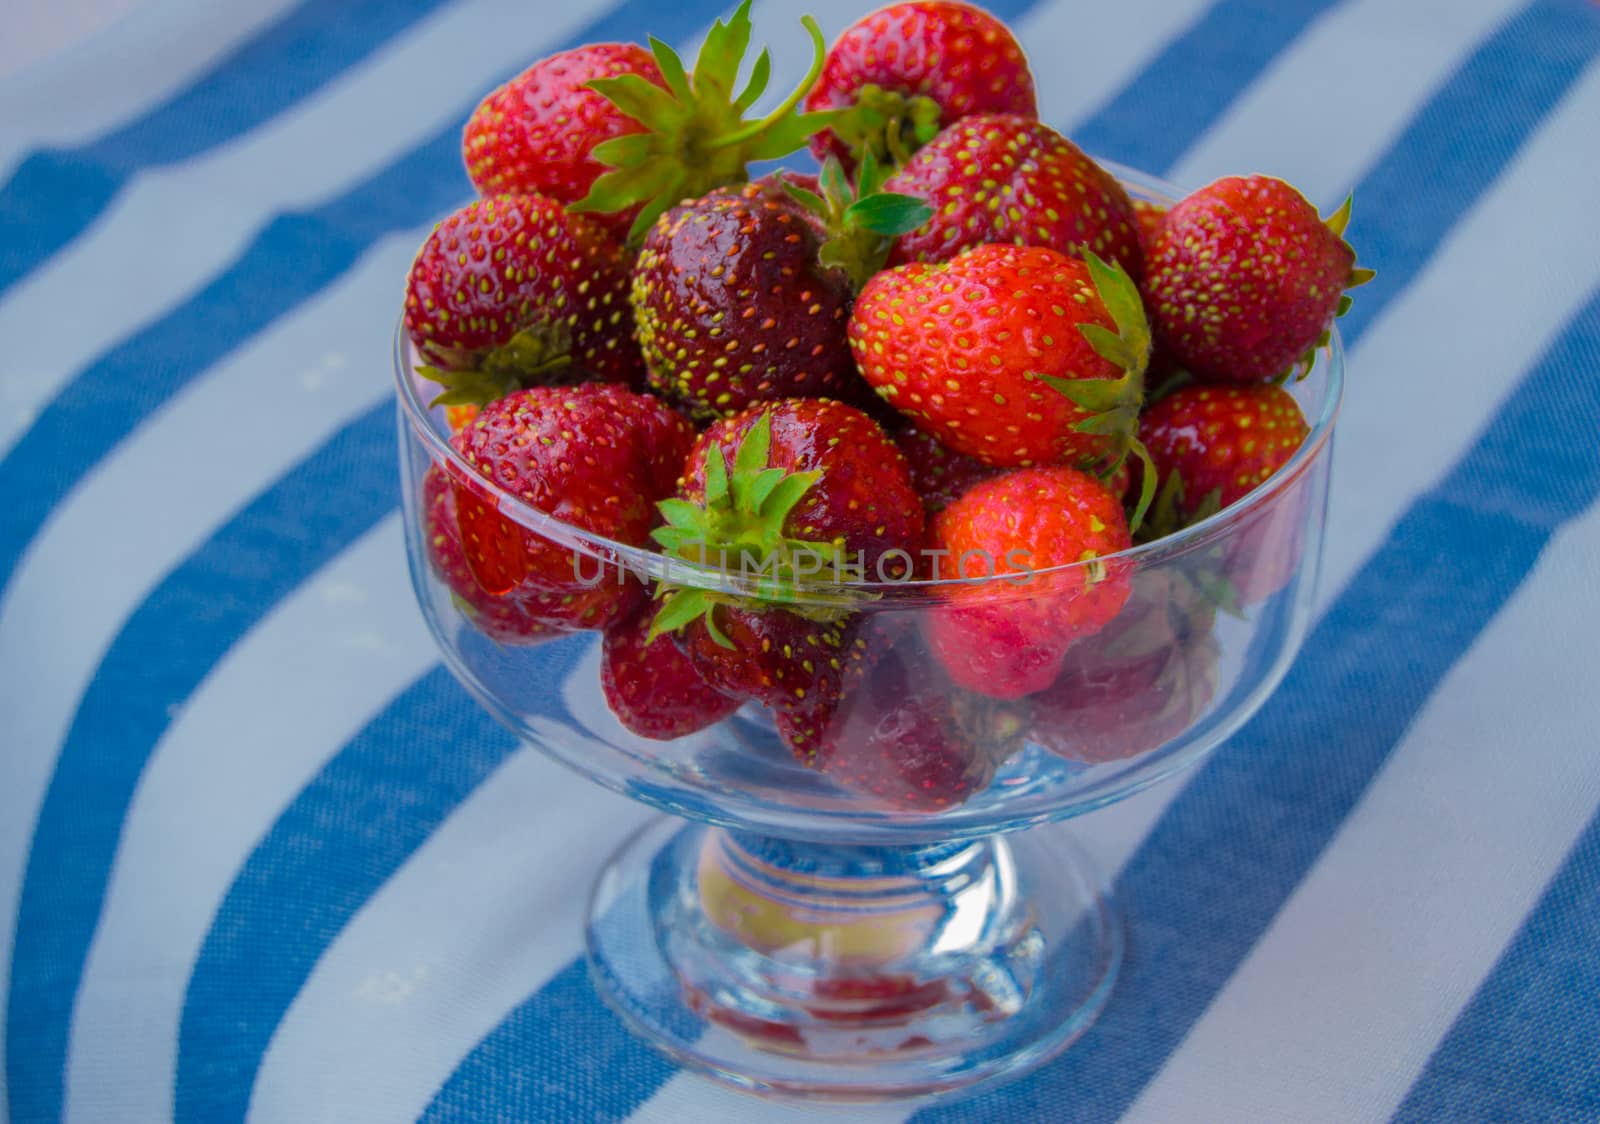 Glass bowl of fresh ripe strawberries on the tablecloth.